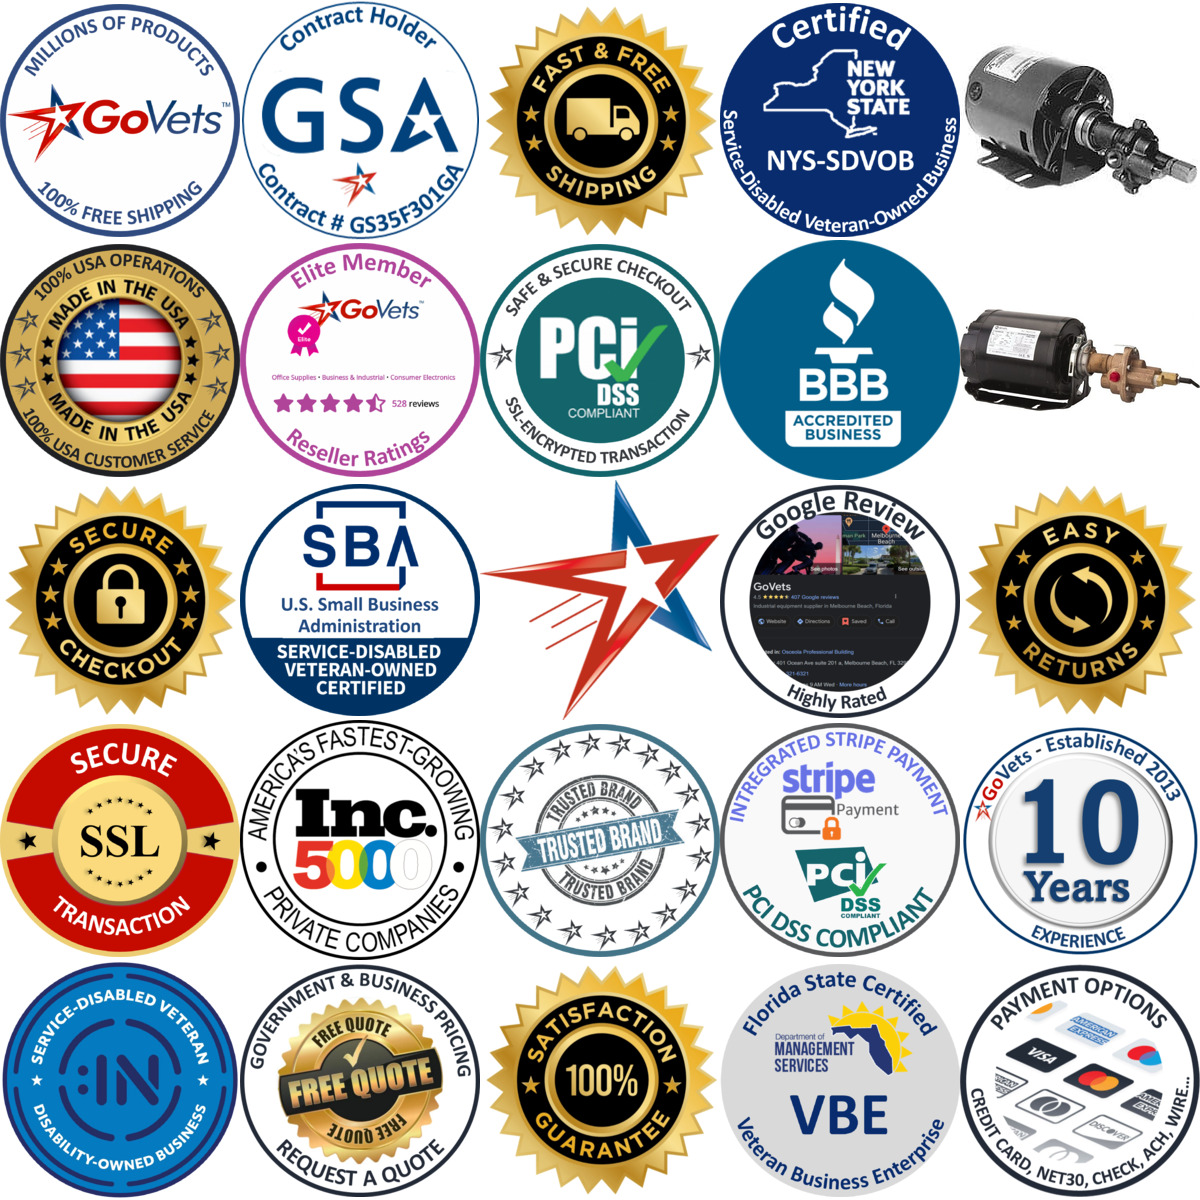 A selection of Gear Pumps products on GoVets